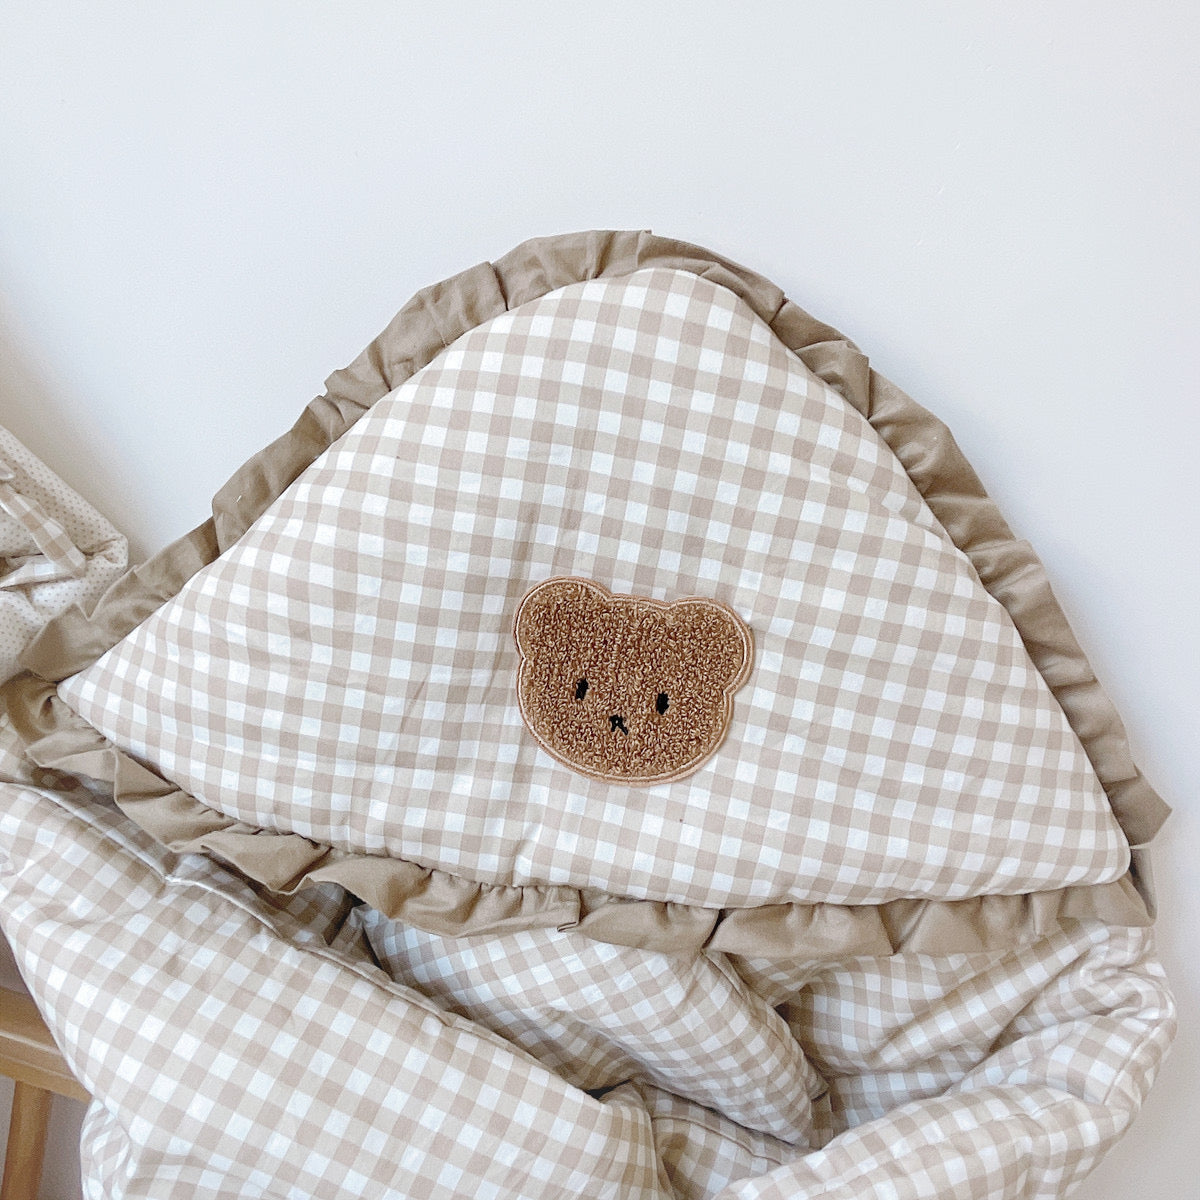 Luxury Quilted Baby Hooded Wrapper I Swaddle Blanket Comforter - Brown Checkered Teddy